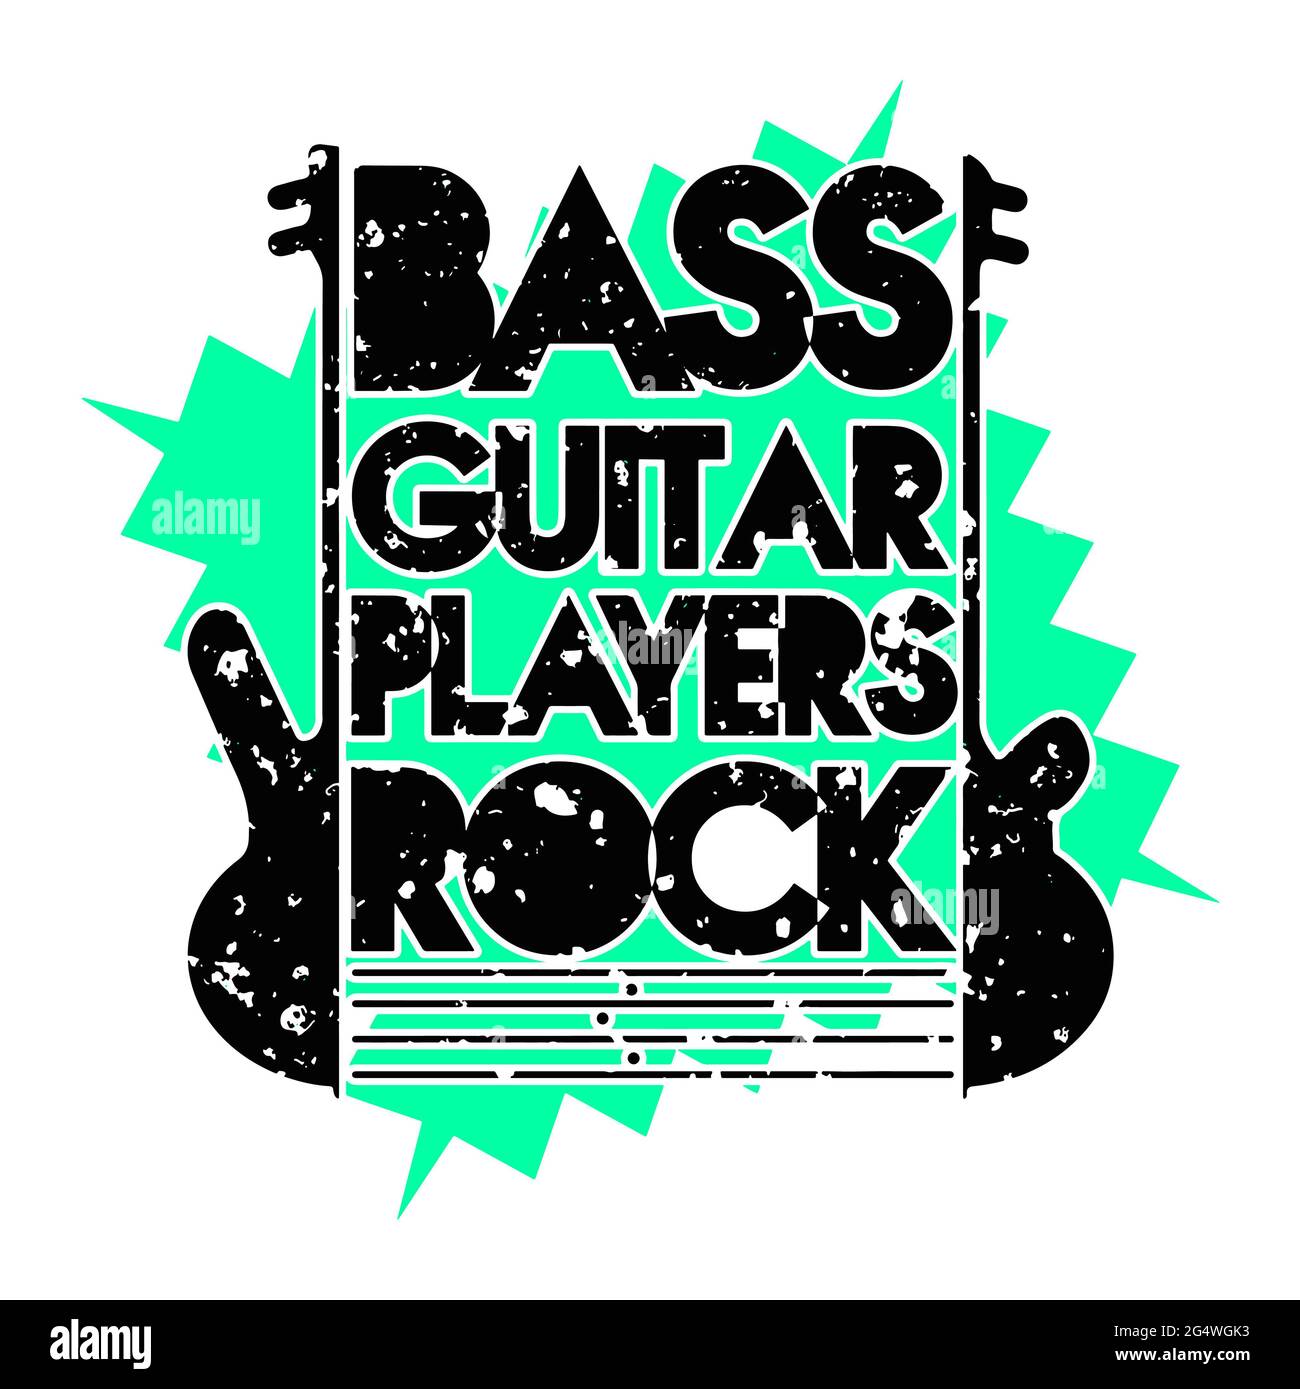 Bass guitar players rock graphic illustration on a white background.  Grunge design with bass guitars especially for rock and roll music industry. Stock Photo